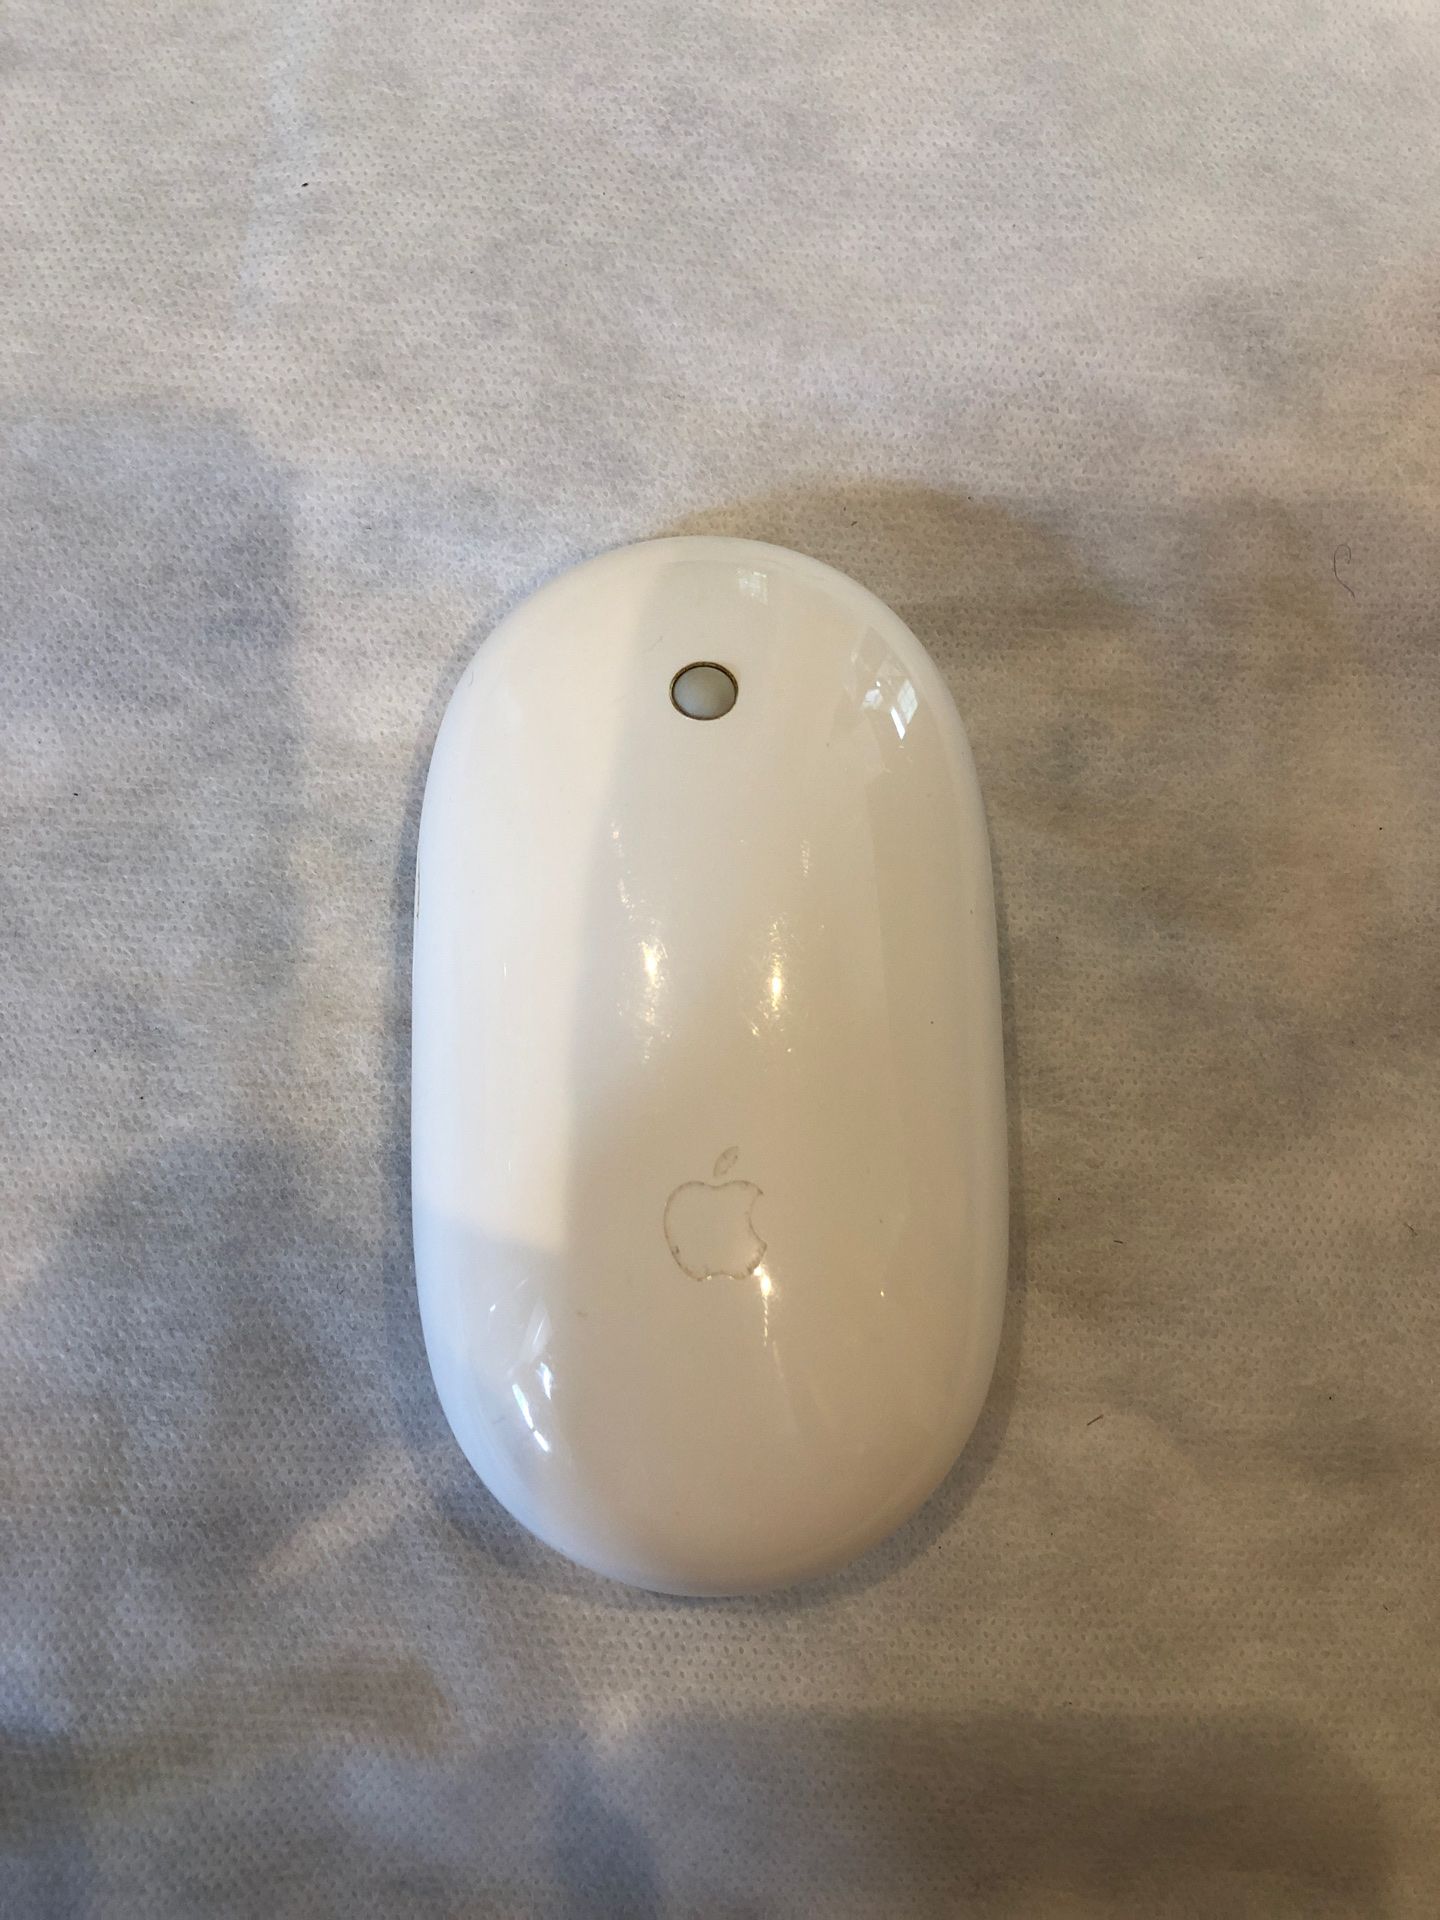 Apple wireless mouse